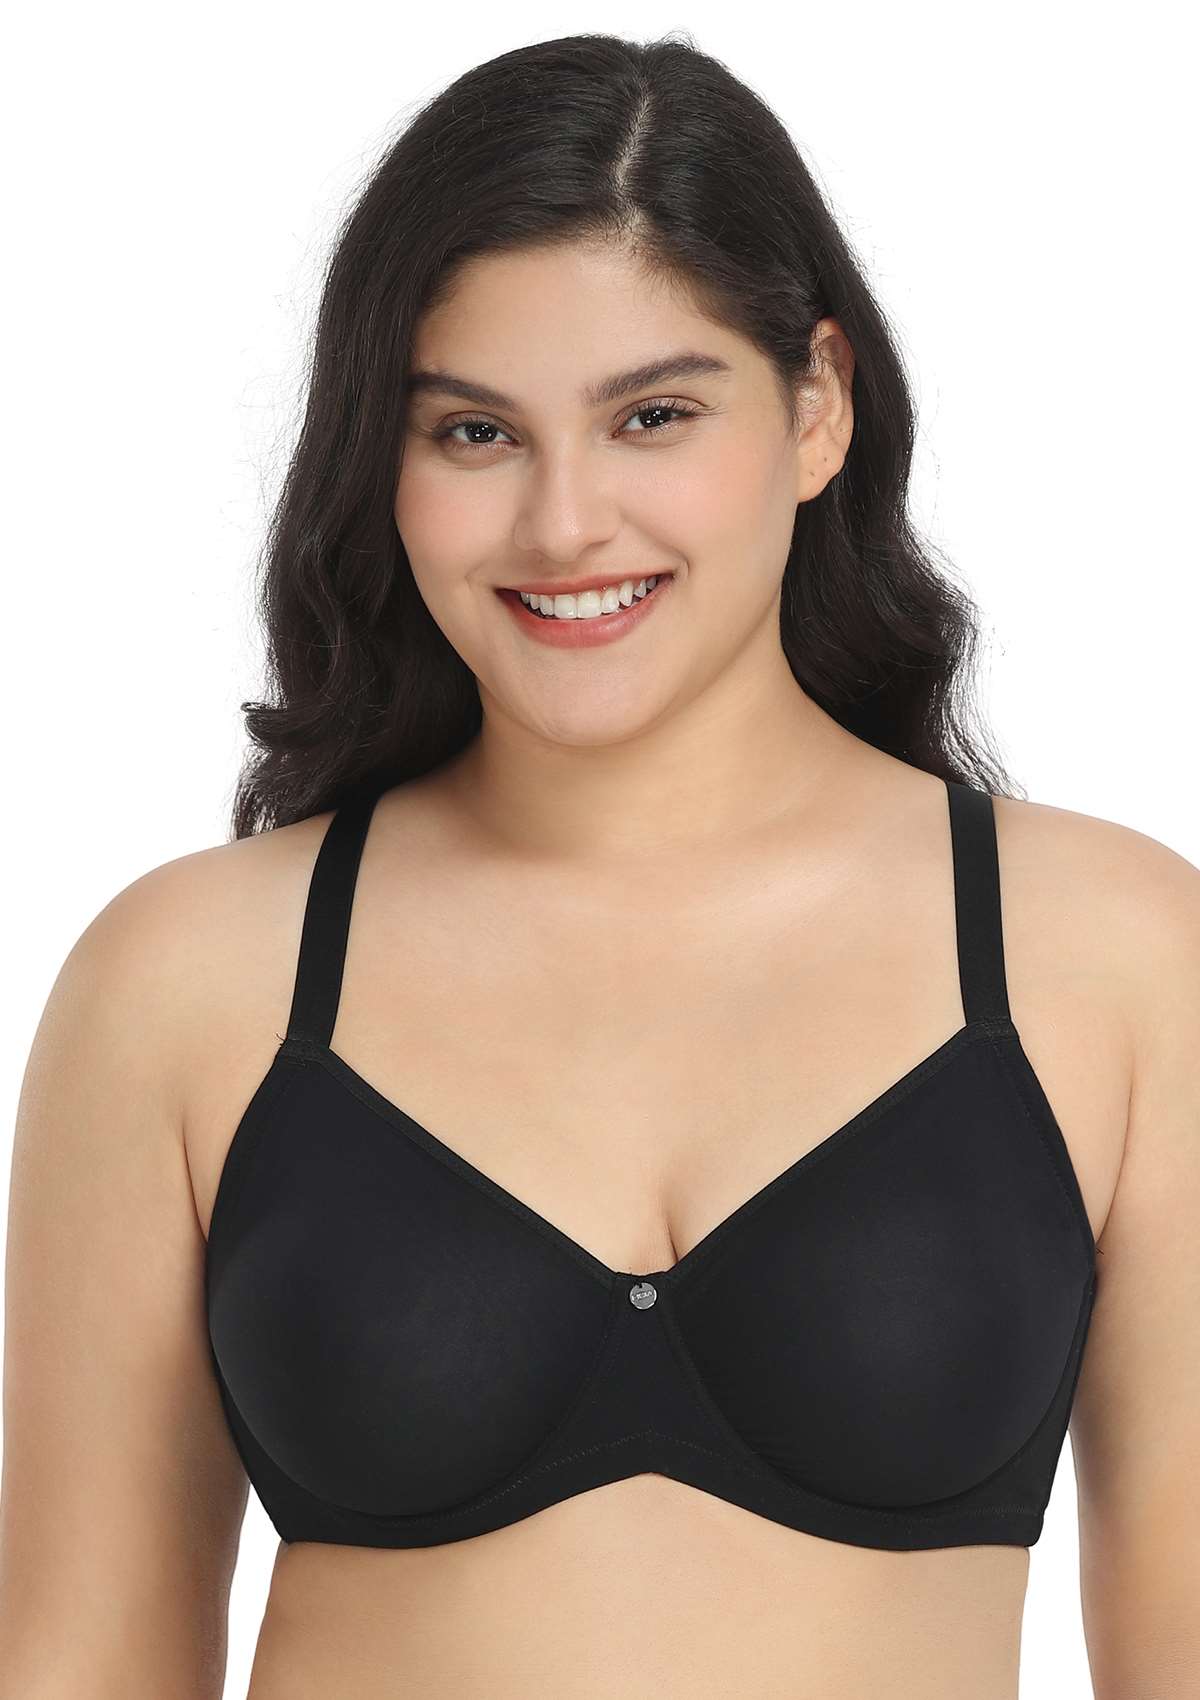 HSIA Marquita Ultimate Comfort Unlined Mesh Sheer Airy Underwire Bra - 40 / D / Black